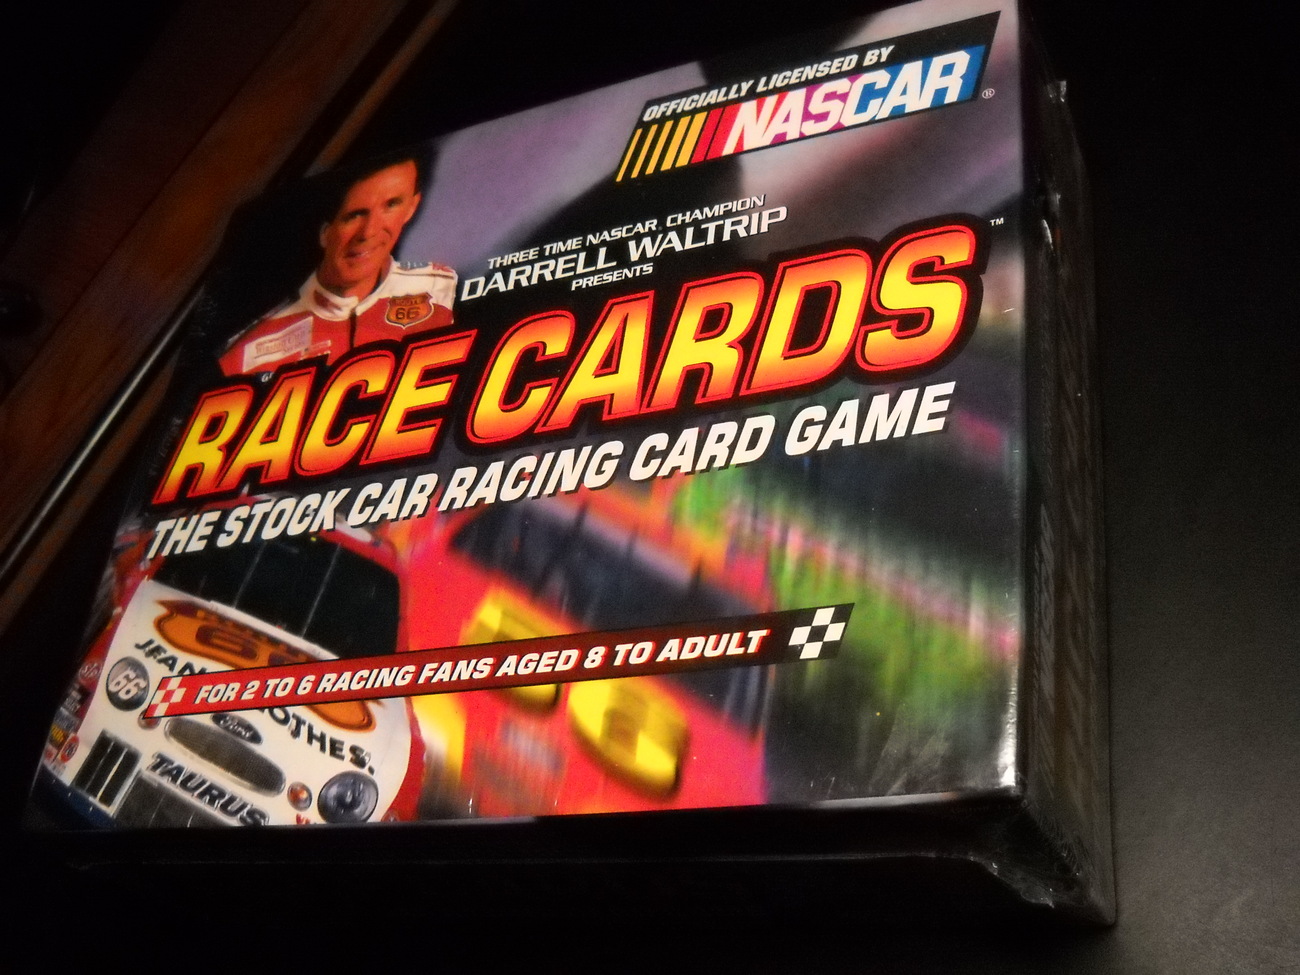 Race Cards Nascar Stock Car Racing Game New and Unused in Still Sealed Box - $9.99